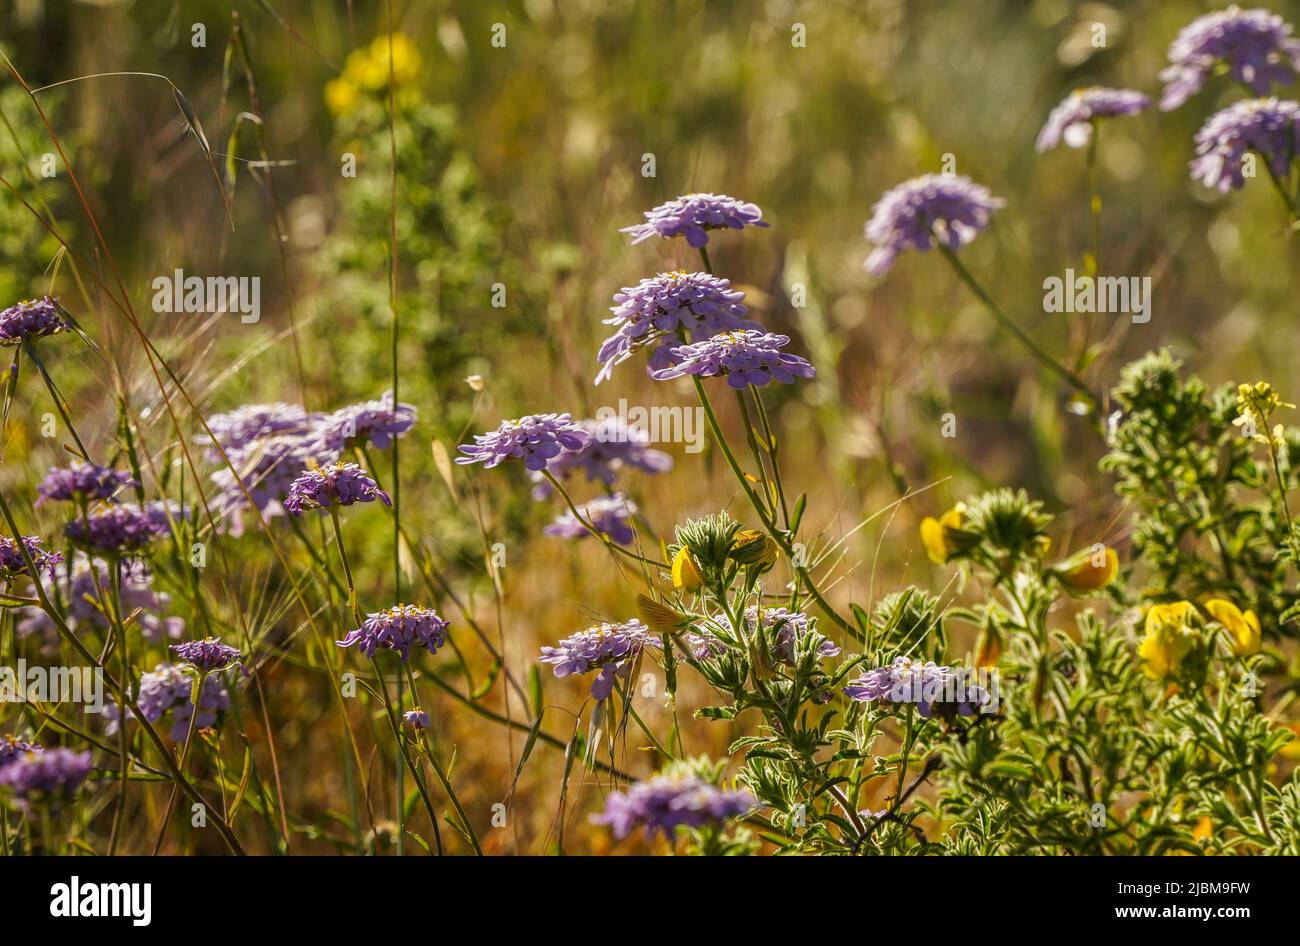 Iberis nazarita, Candytuft plant wildflower growing in the wild, Andalucia, Spain. Stock Photo